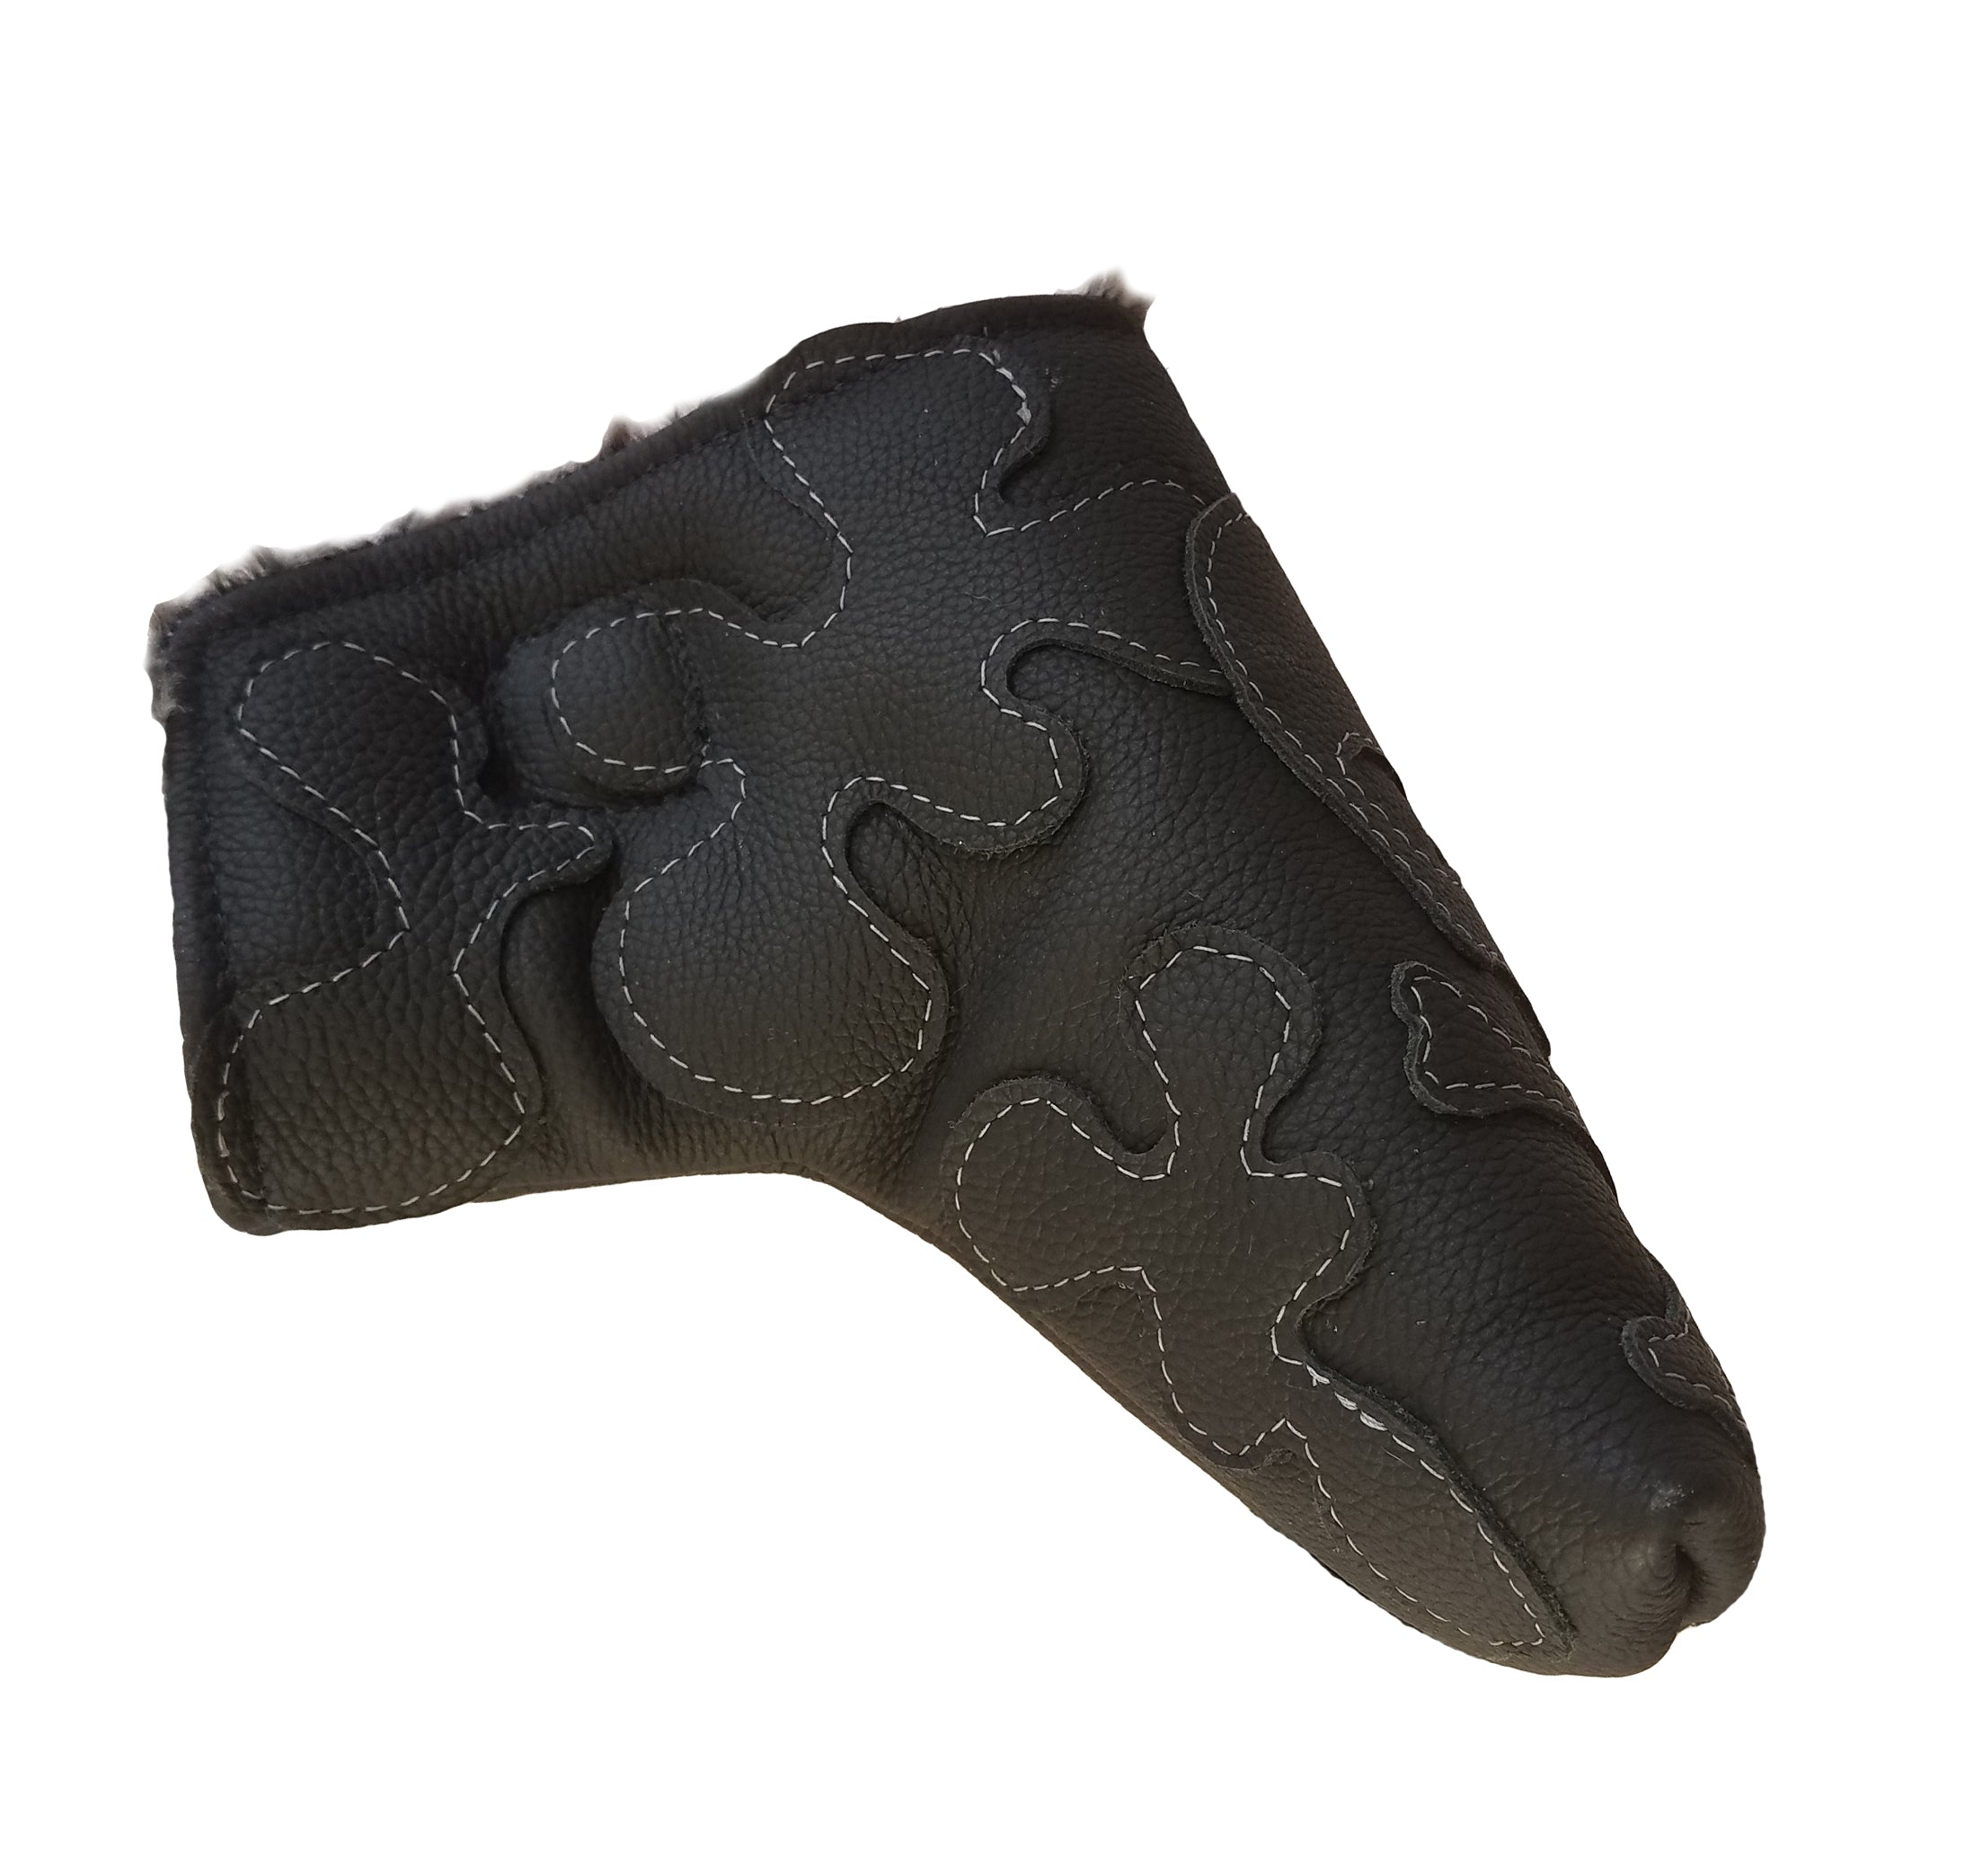 The "Murdered Out" White Stitched Putter Cover - Robert Mark Golf